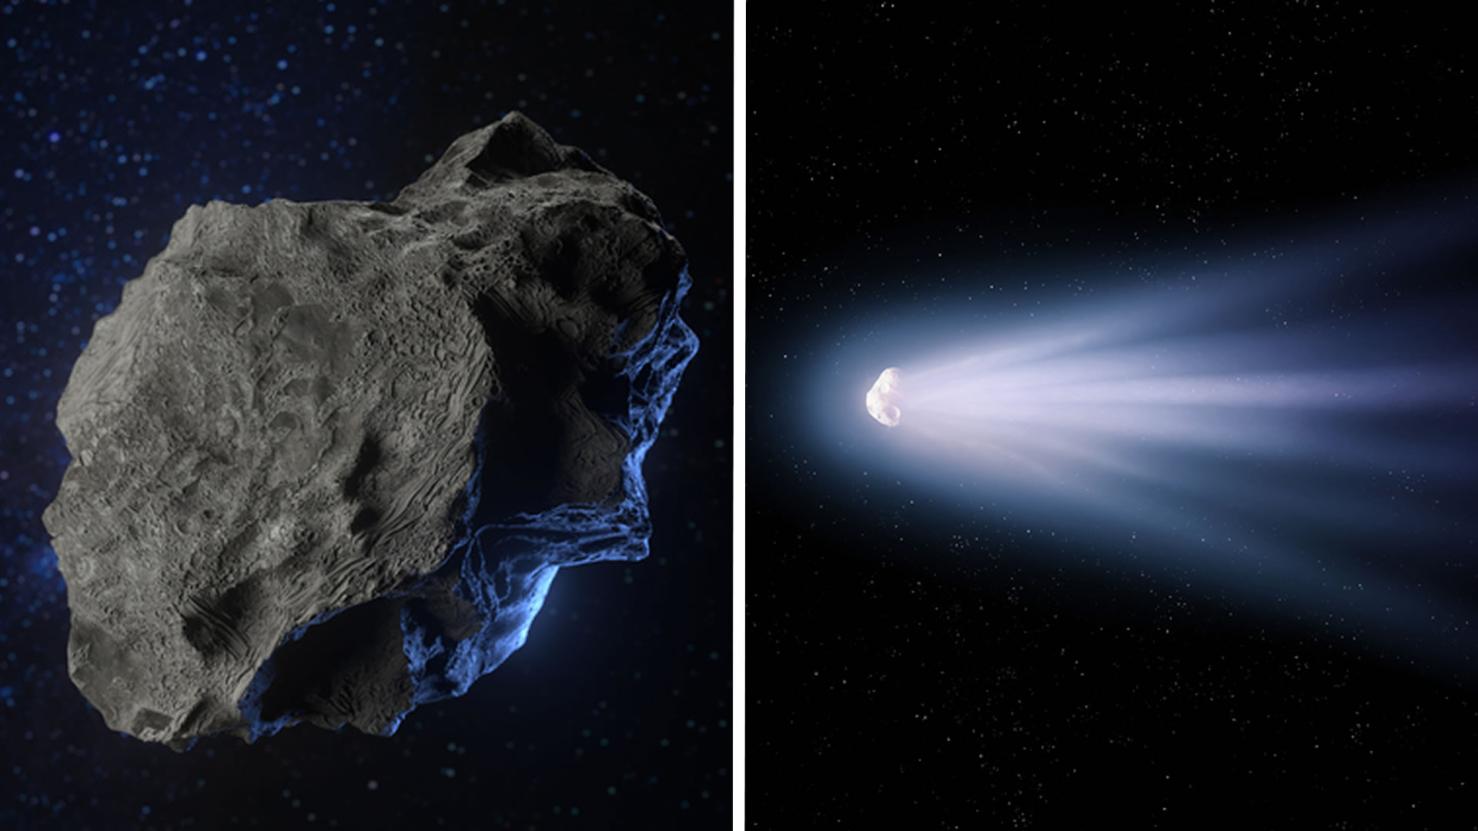 What is the composition of a comet's tail?